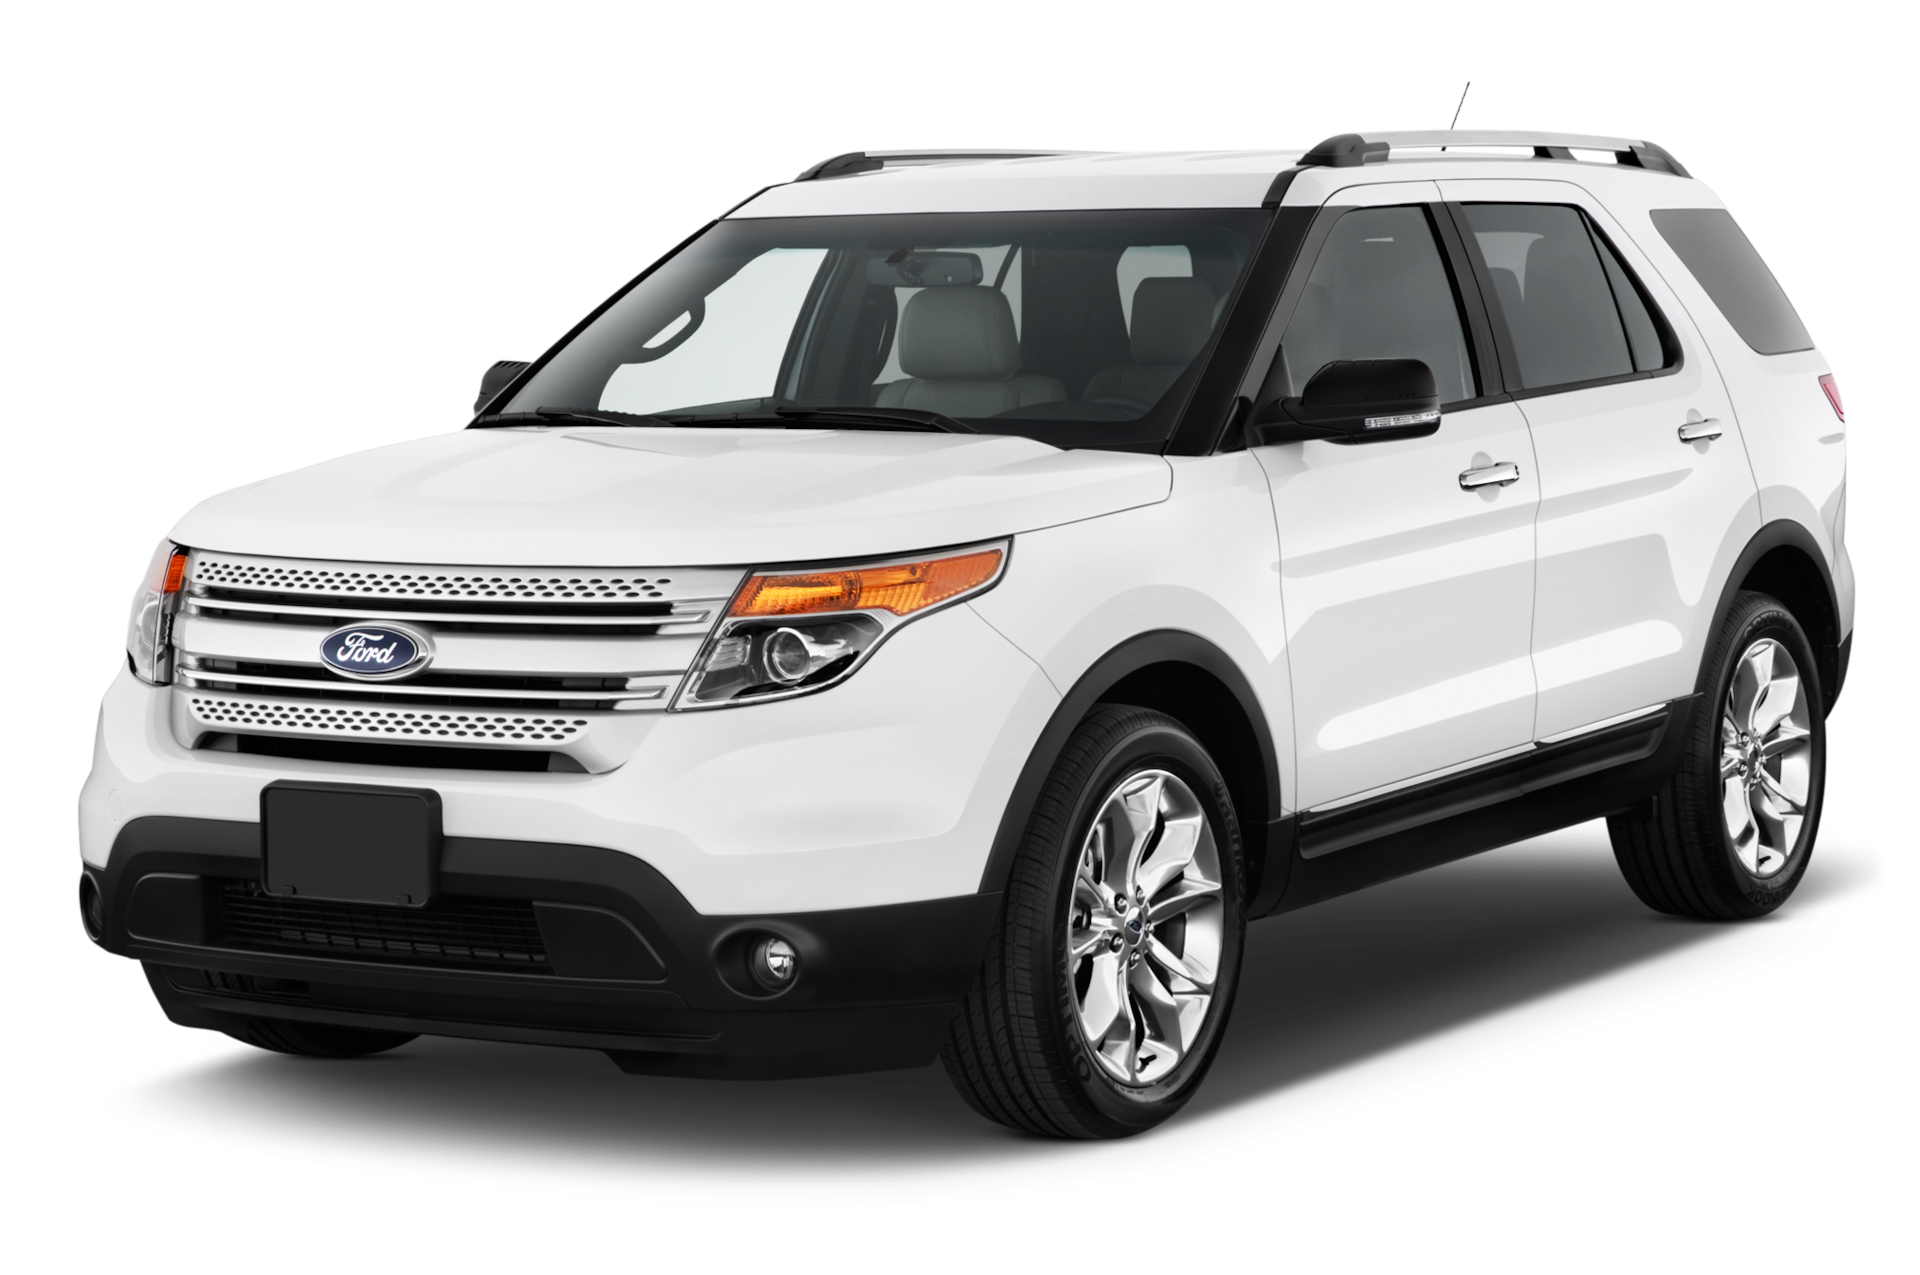 2015 Ford Explorer Prices, Reviews, and Photos - MotorTrend